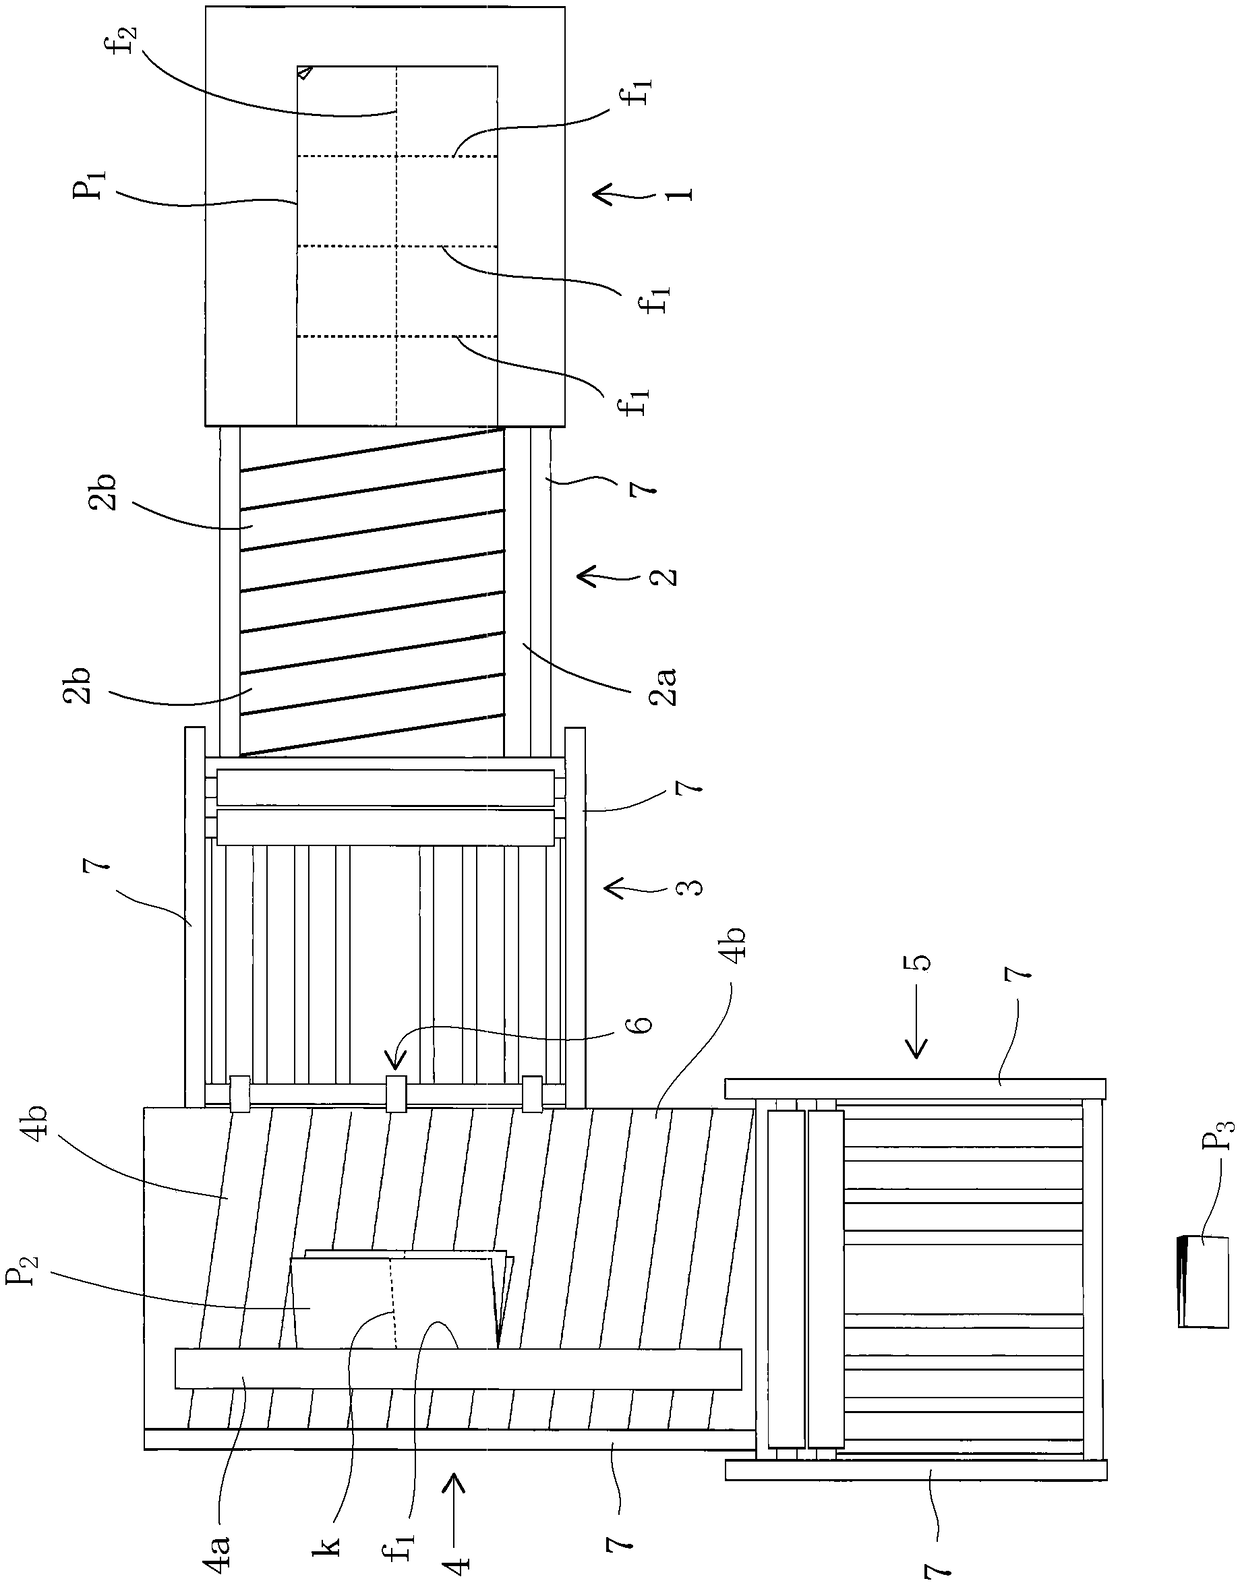 Quire-forming method and paper-folding machine